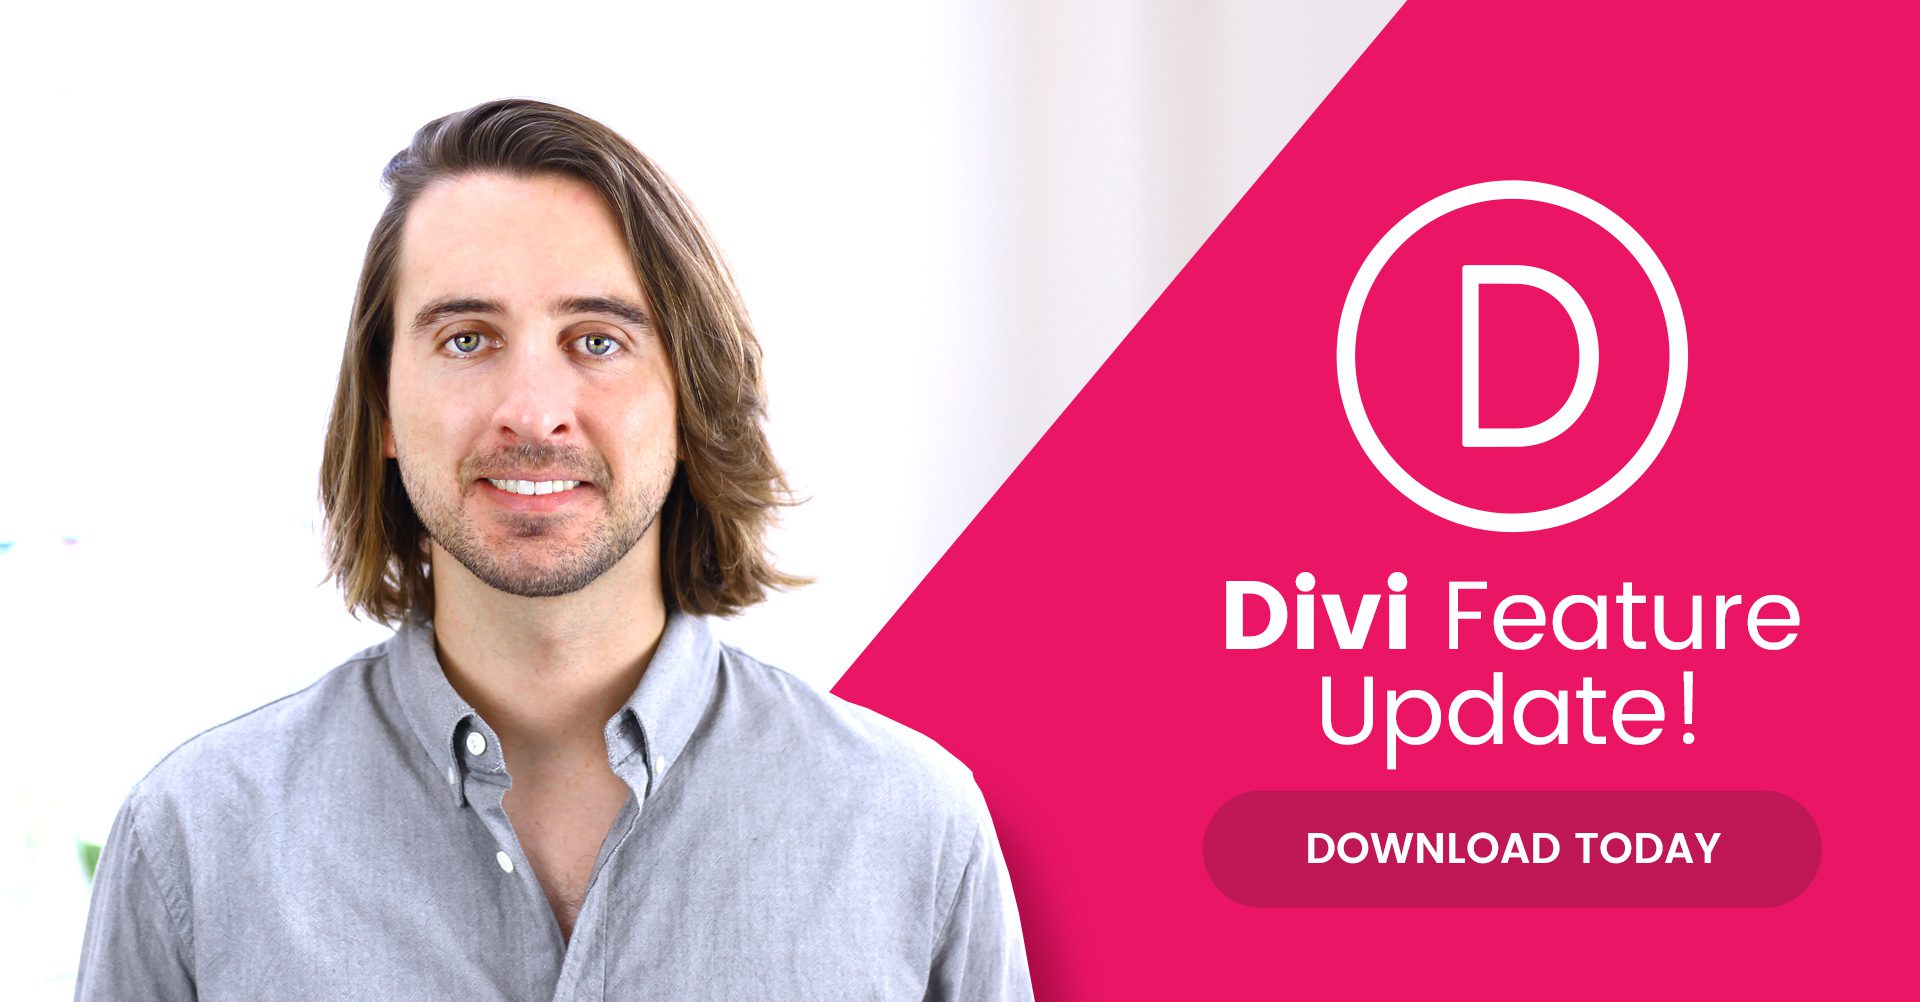 Divi Feature Update! The New Contact Form Module With More Input Options, Conditional Logic & Field Validation